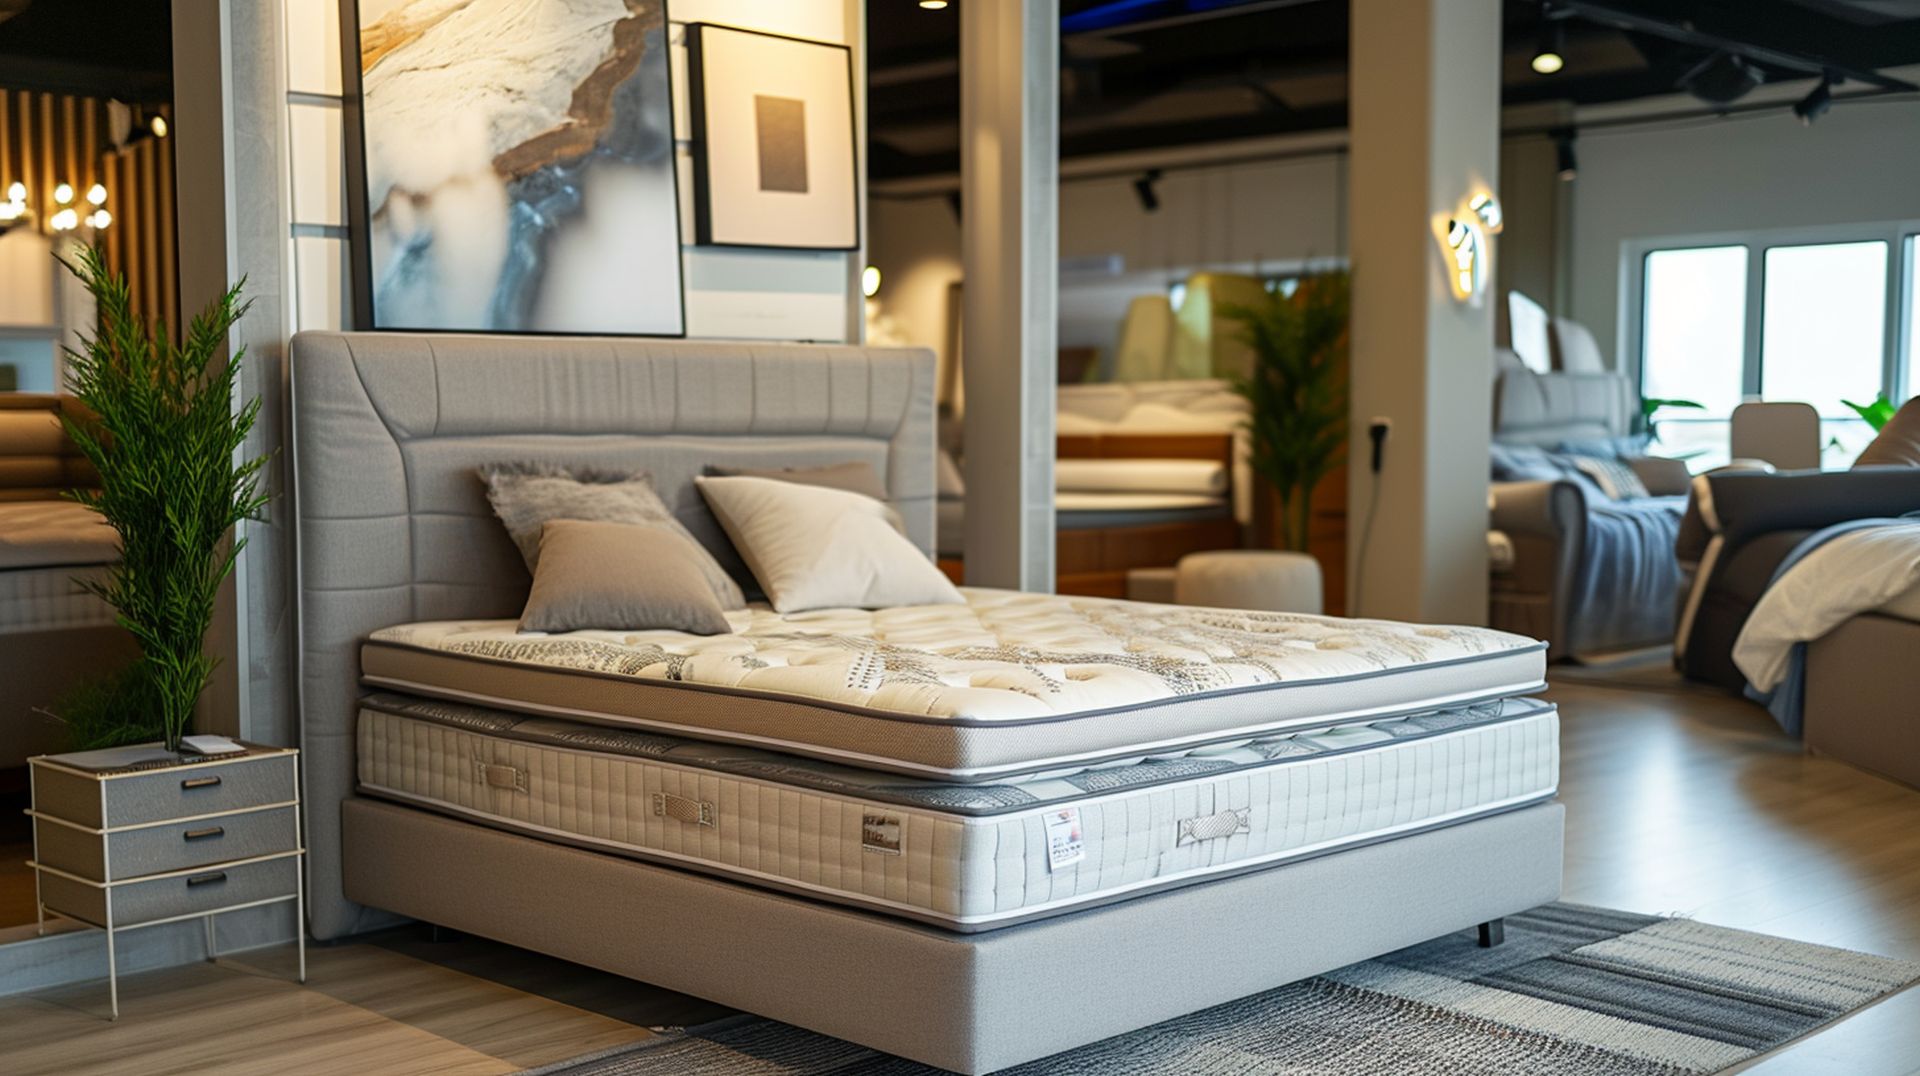 Local Corvallis mattress stores have the best prices, sales, and deals if you're looking for a new mattress in Corvallis